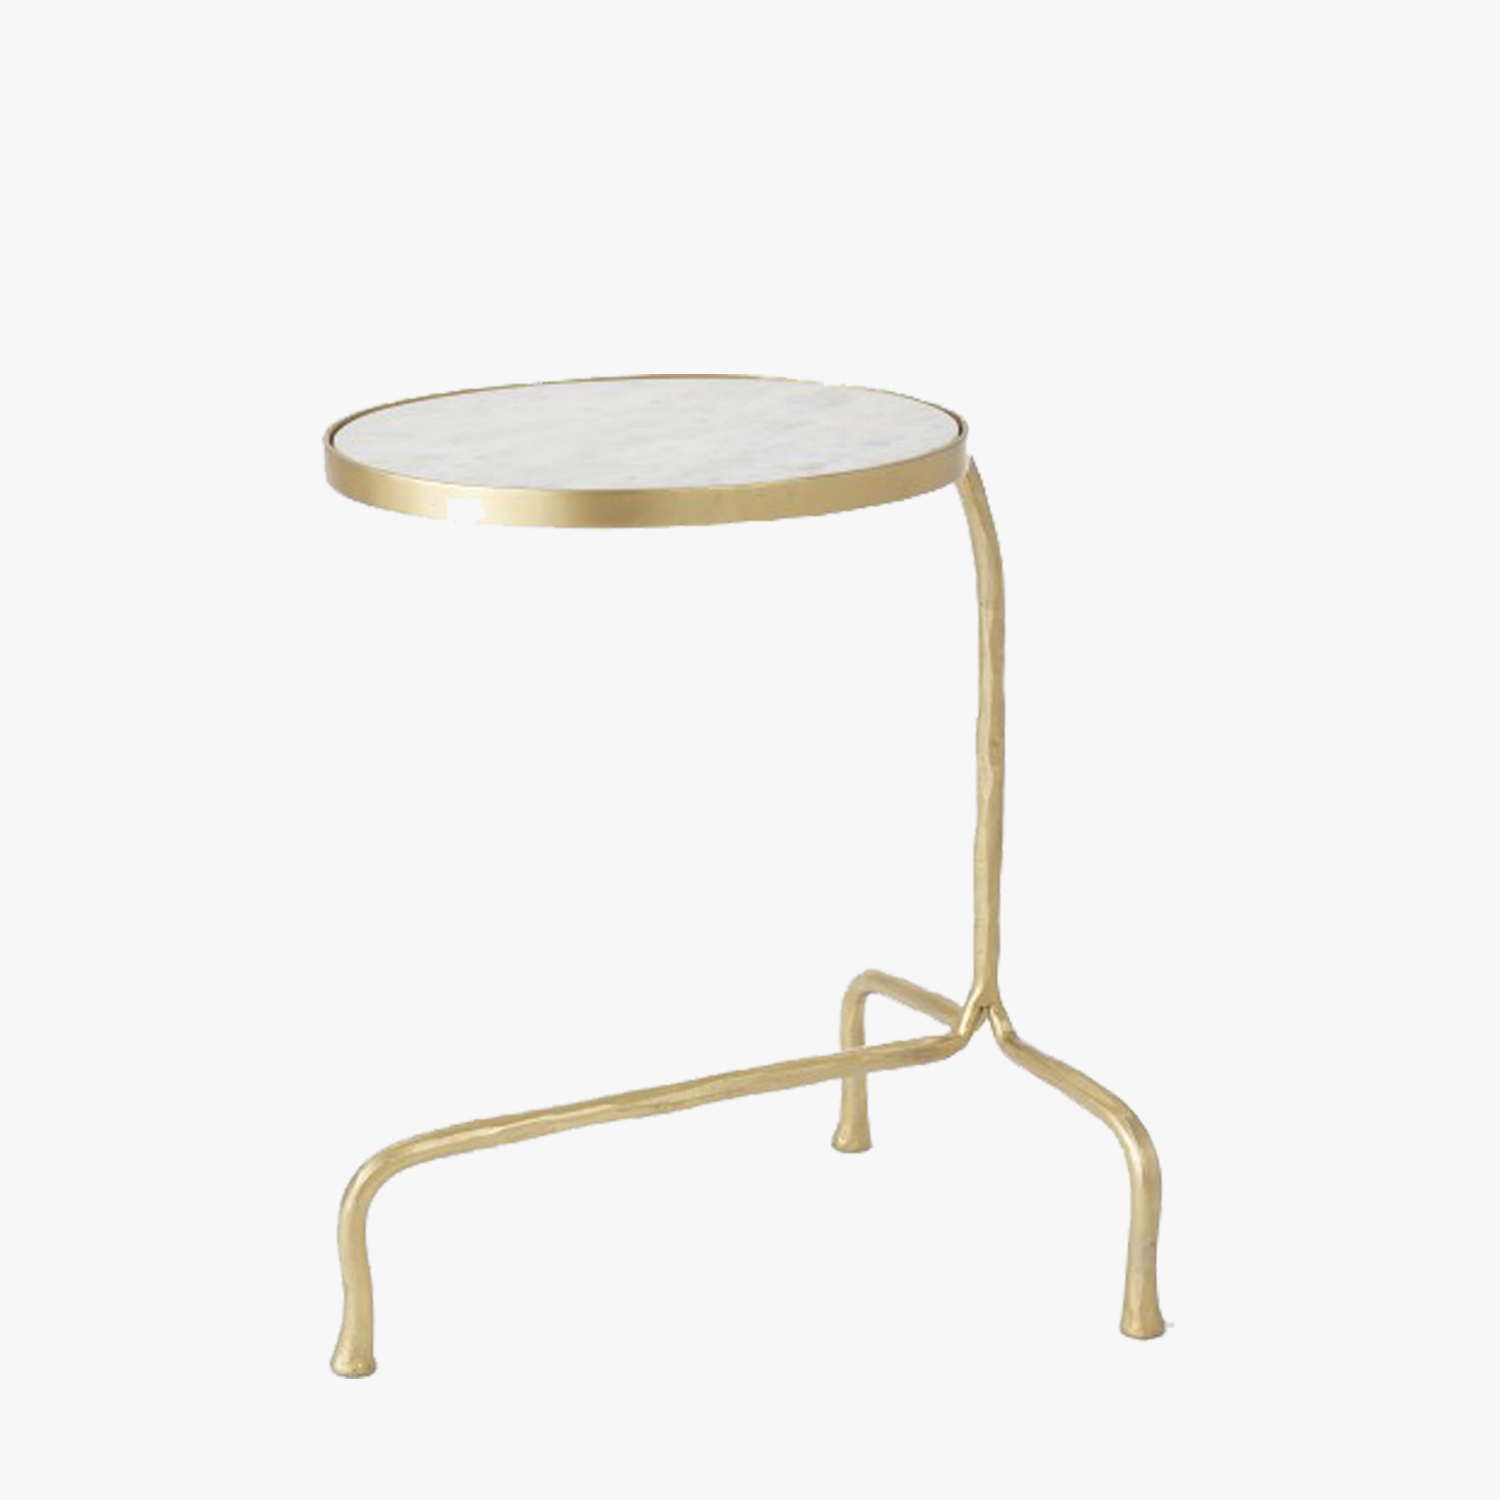 cantilever brass accent table dear keaton gold cantelvered ashley furniture round coffee legs nautical bedroom end standard tablecloth sizes target glass retro style sofa sheesham